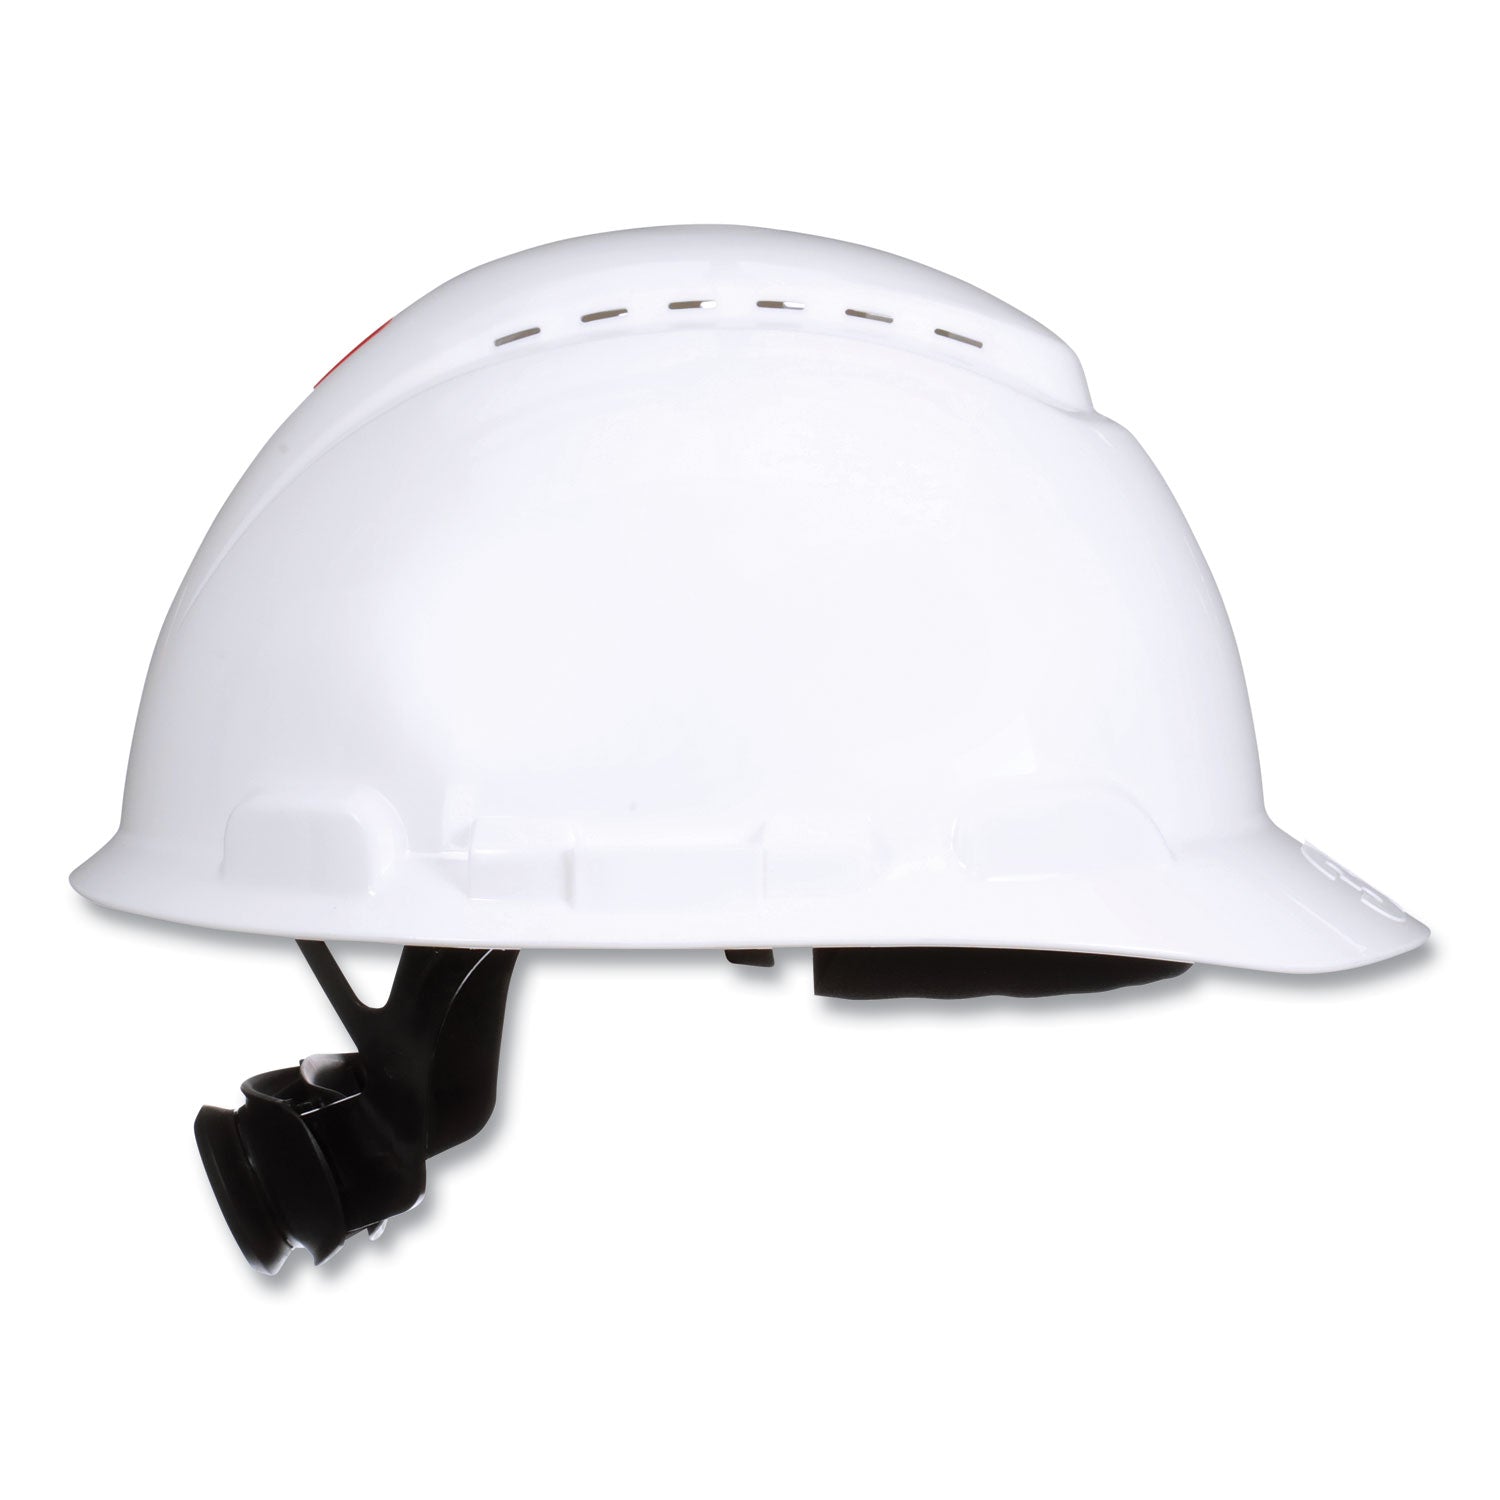 securefit-h-series-hard-hats-h-700-front-brim-cap-with-uv-indicator-4-point-pressure-diffusion-ratchet-suspension-white_mmmh701sfvuv - 1